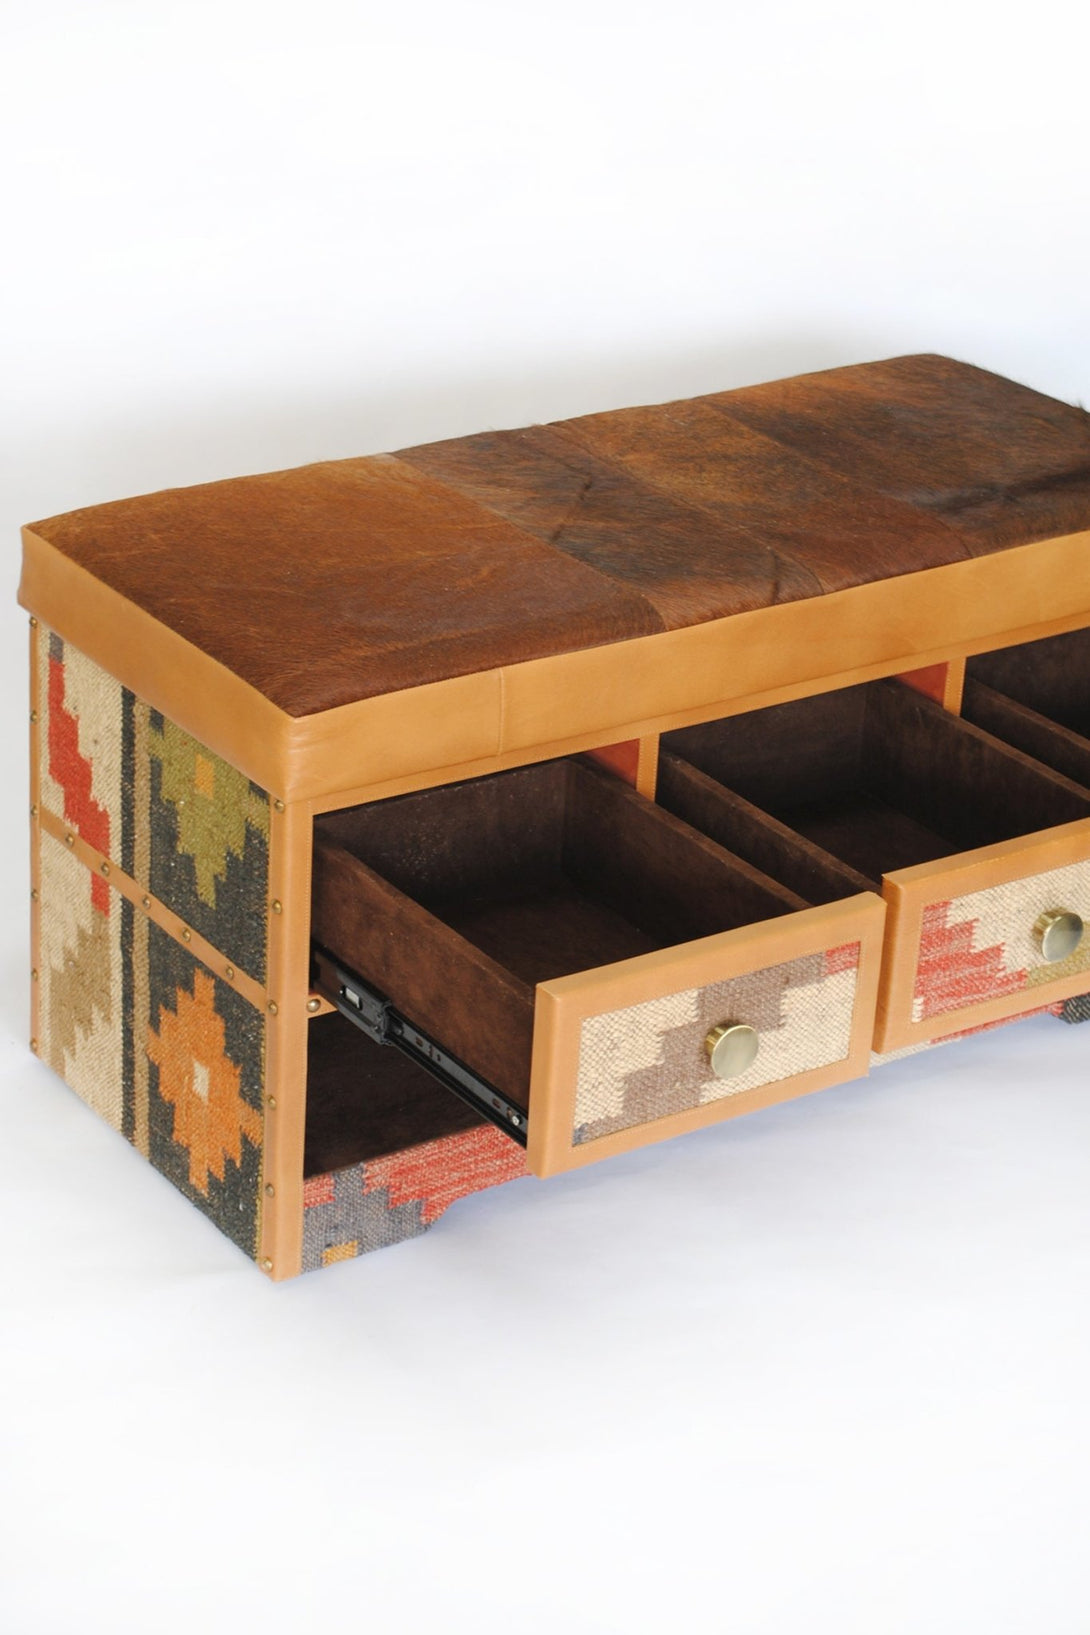 ARGO - BENCH WITH DRAWERS - ART AVENUE